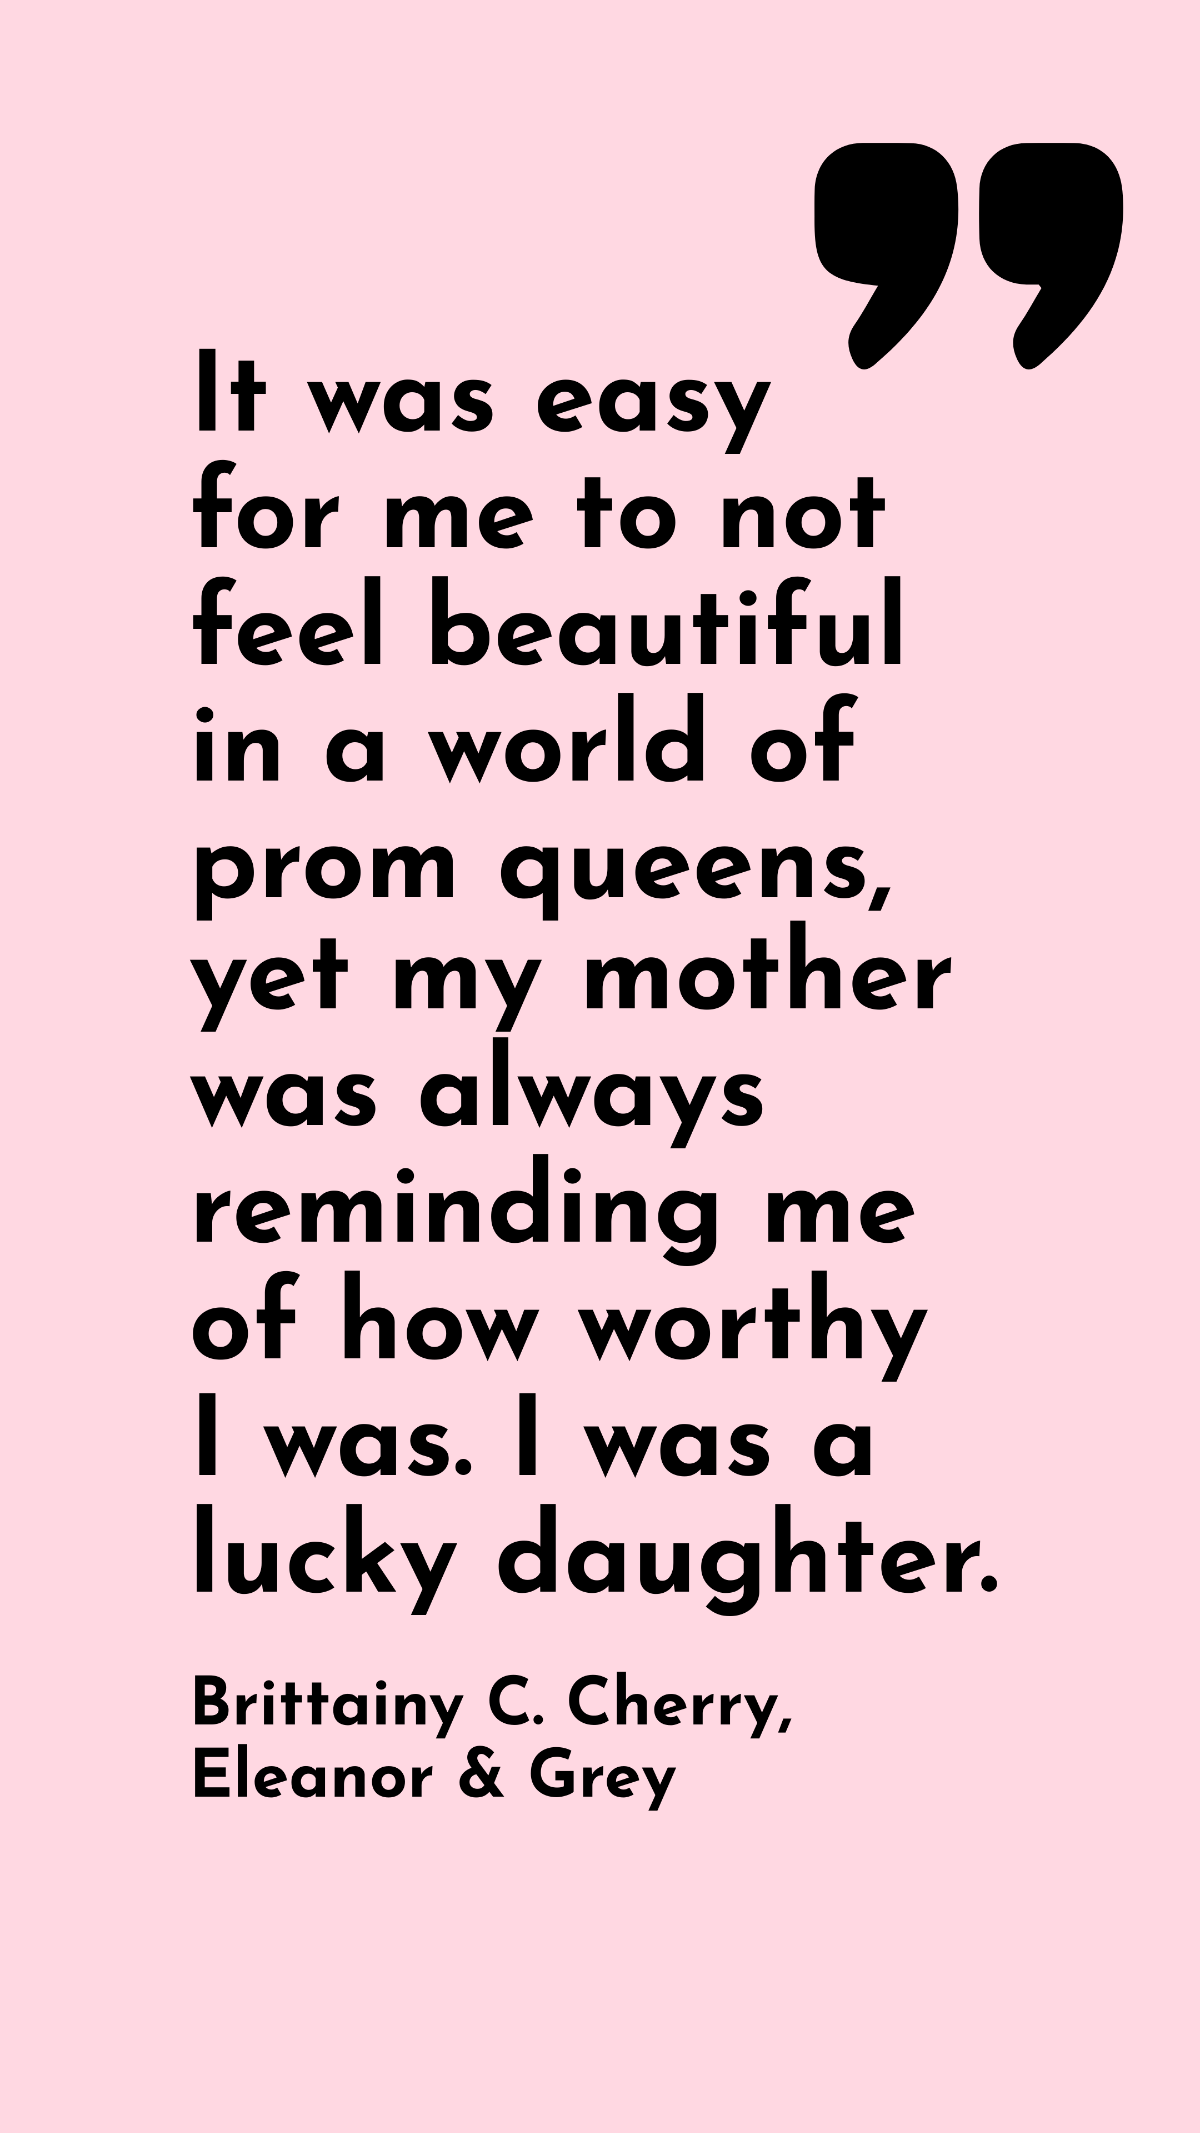 Brittainy C. Cherry, Eleanor & Grey - It was easy for me to not feel beautiful in a world of prom queens, yet my mother was always reminding me of how worthy I was. I was a lucky daughter. Template